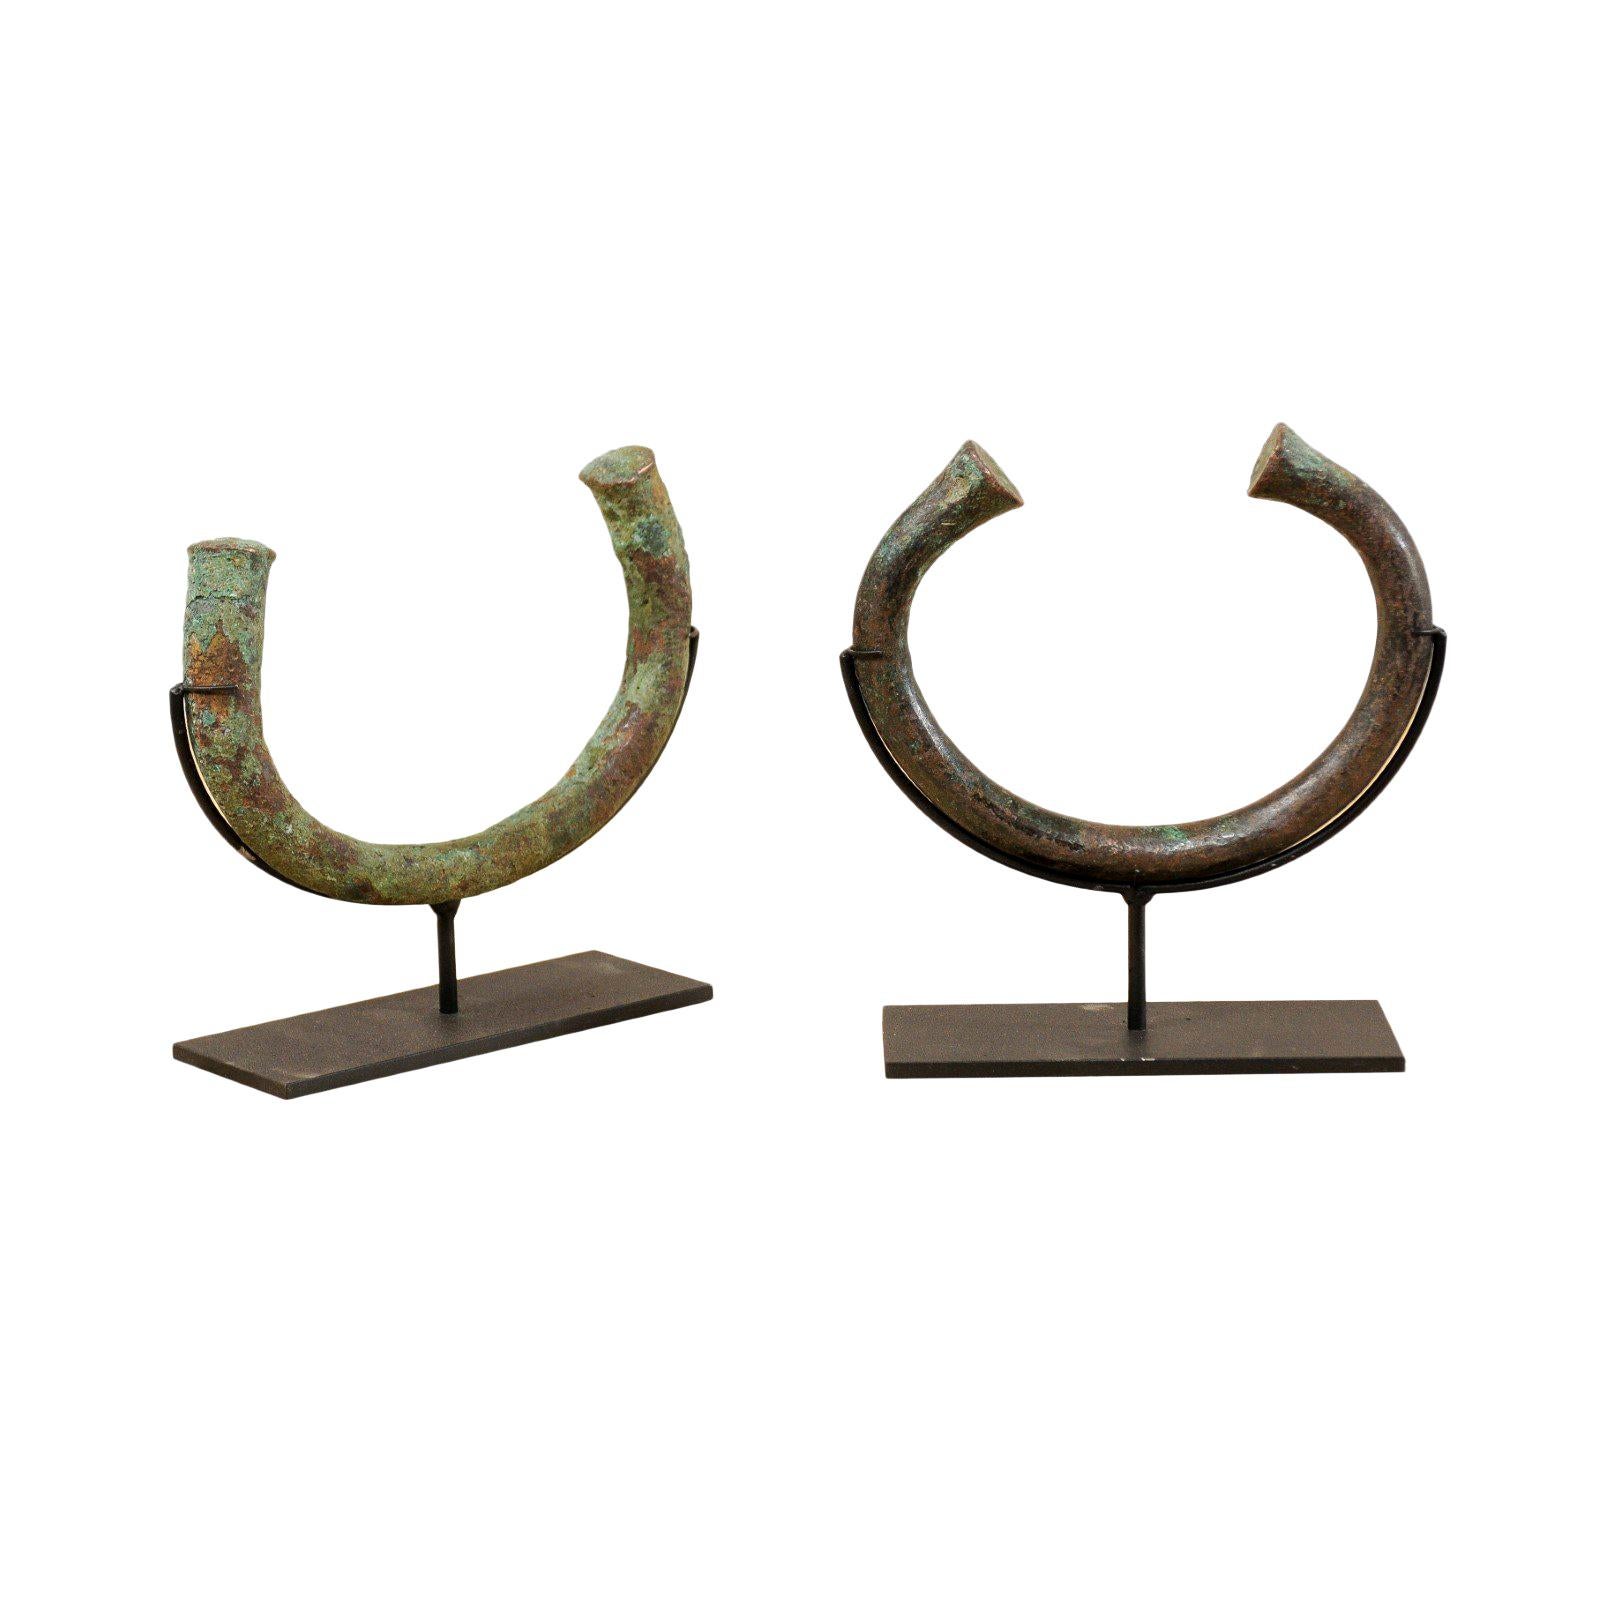 Pair of Igbo Tribe West African Manilla Currencies on Custom Stands